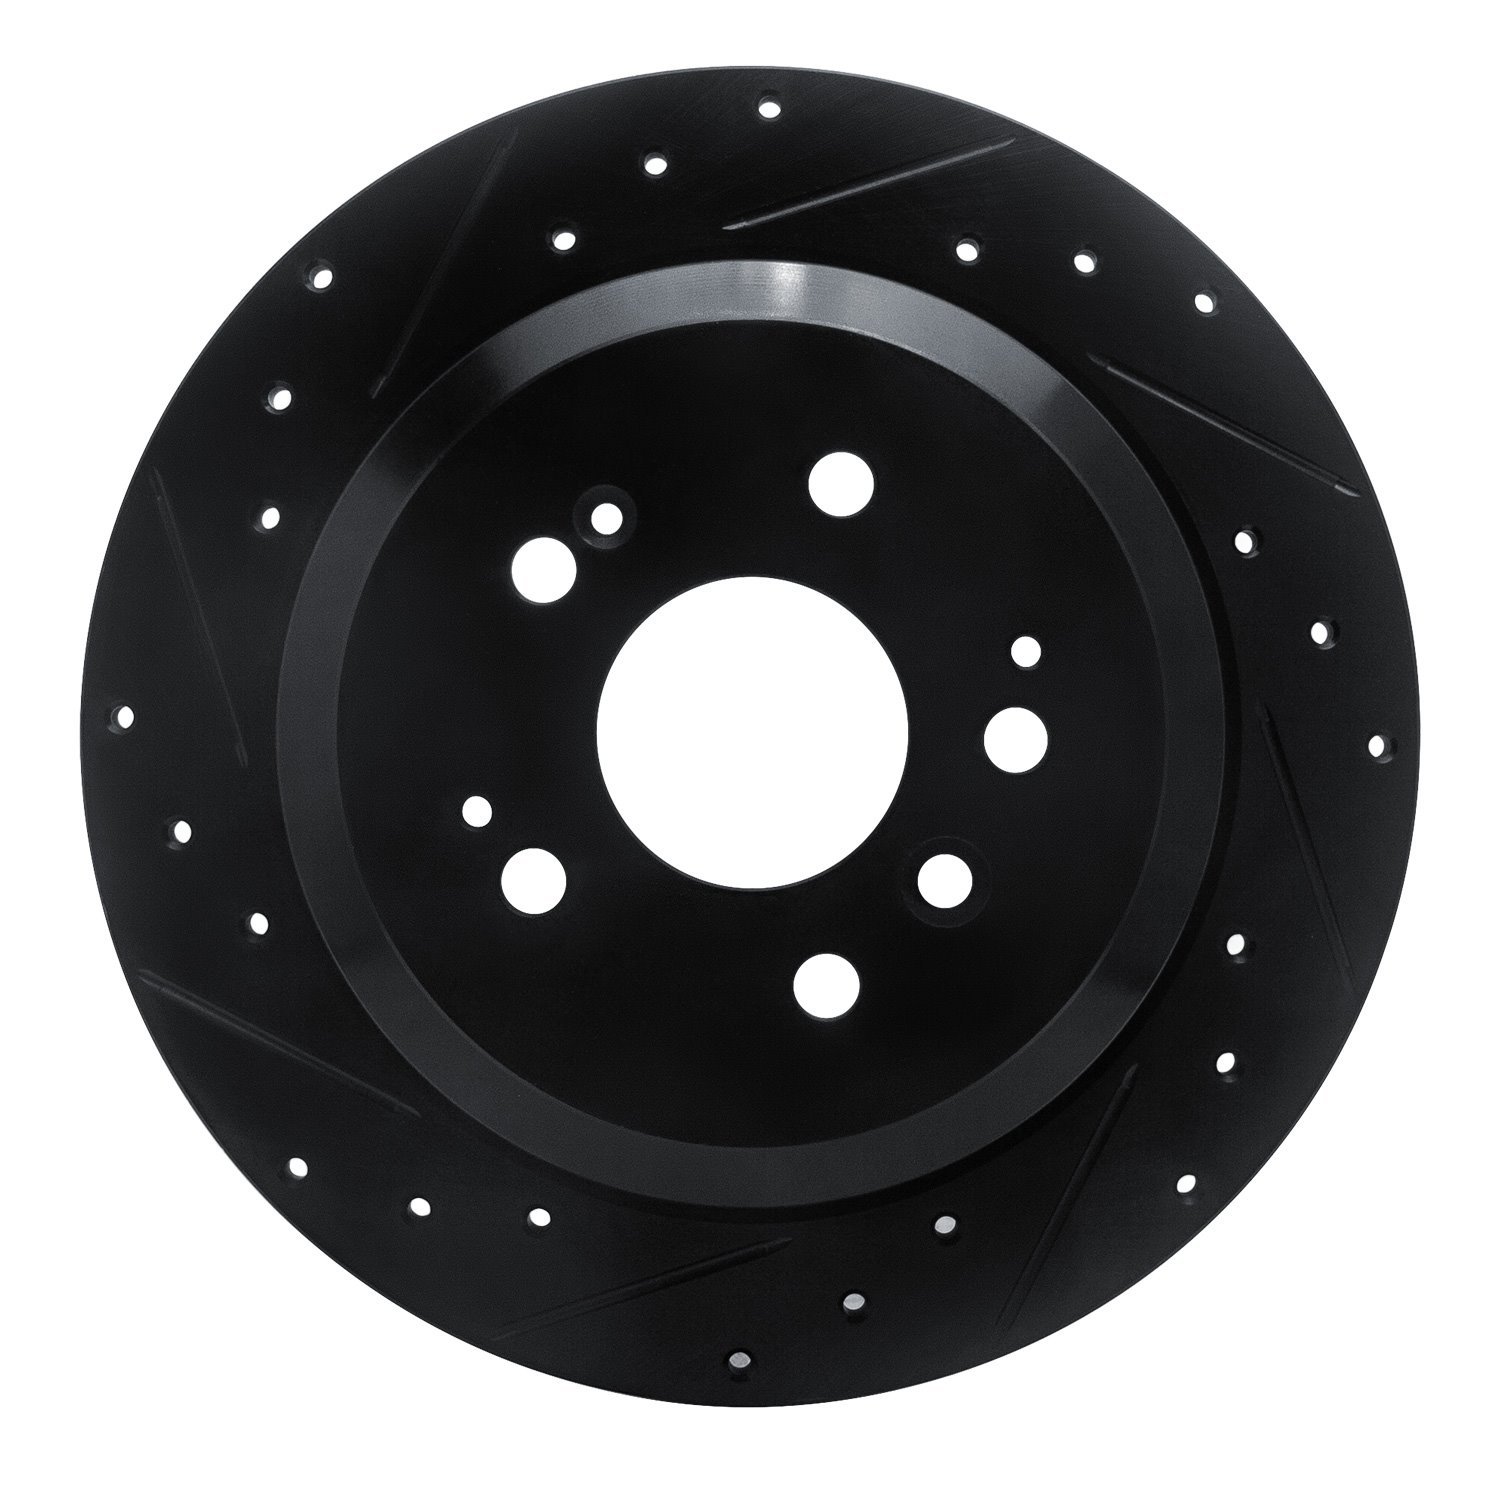 E-Line Drilled & Slotted Black Brake Rotor, Fits Select Acura/Honda, Position: Rear Left